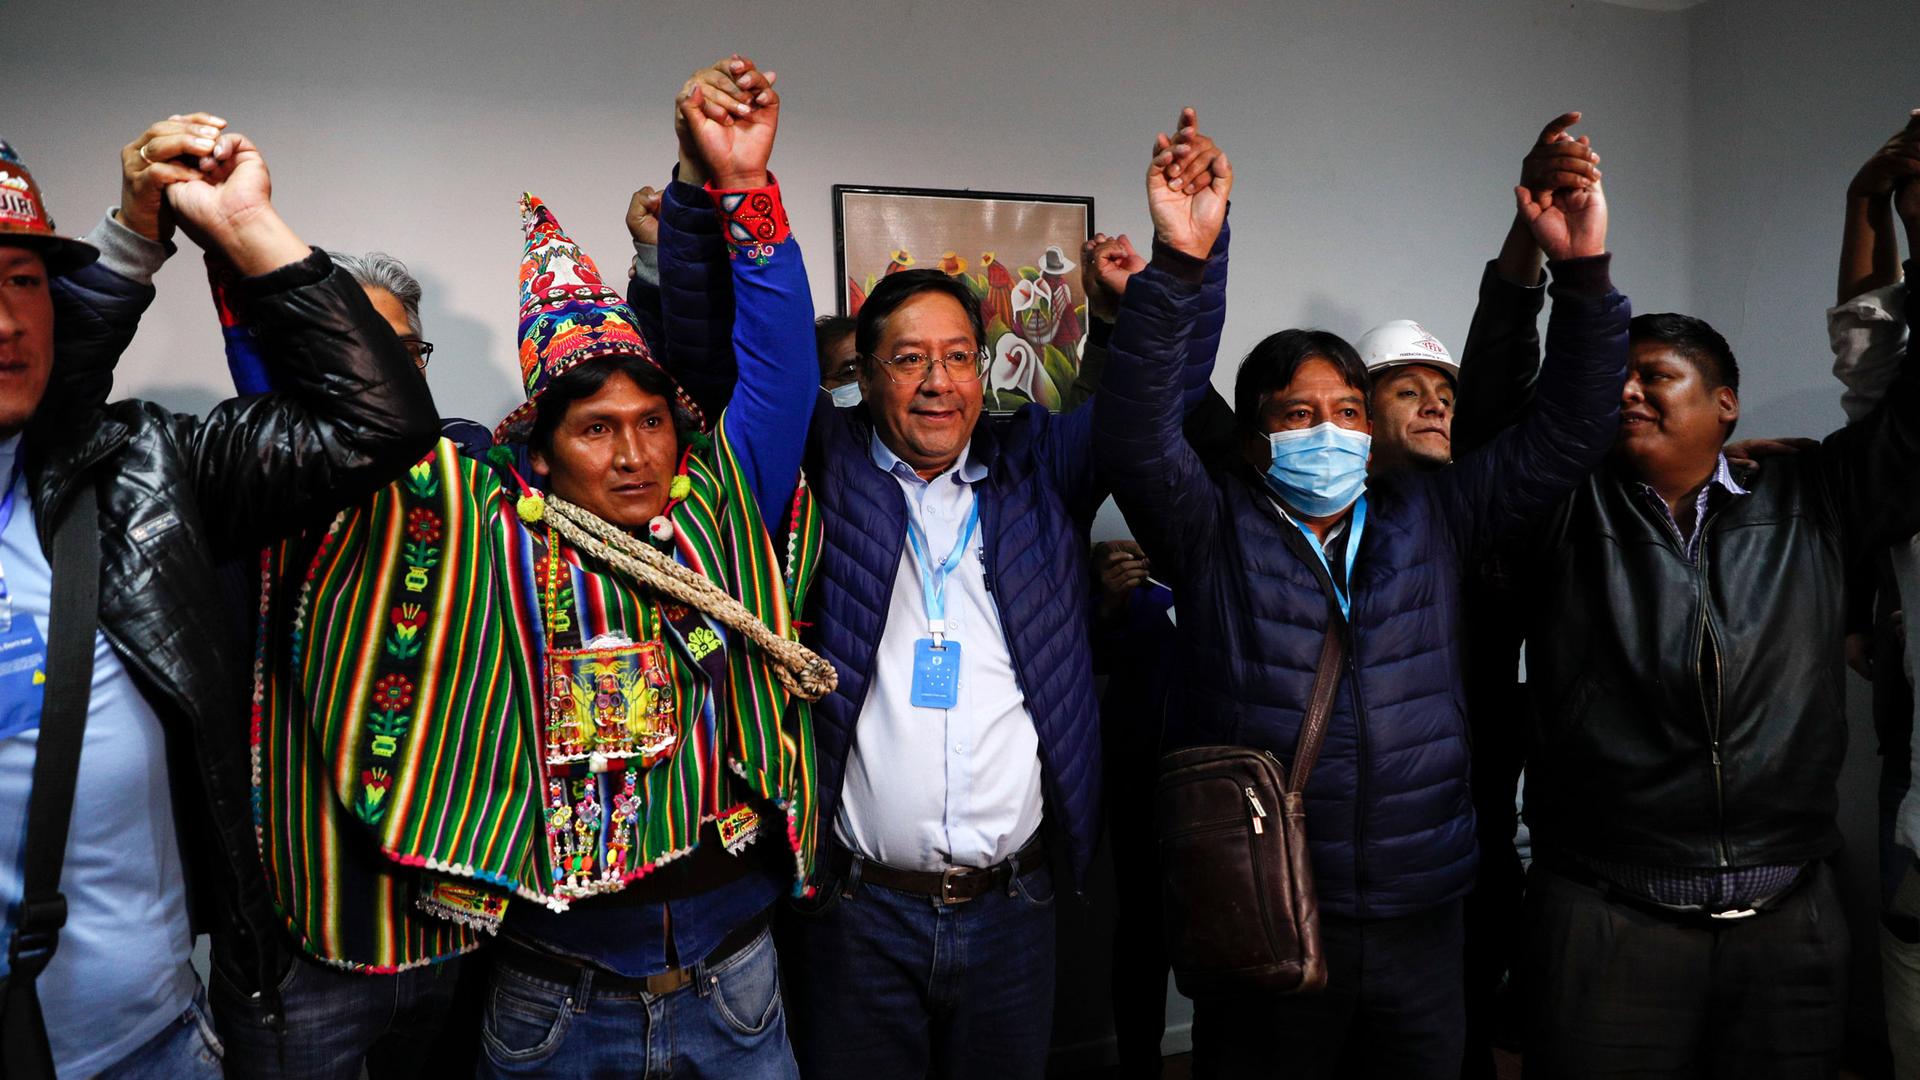 Several Bolivian politicians are shown in a room holding their hands in the air in celebration.